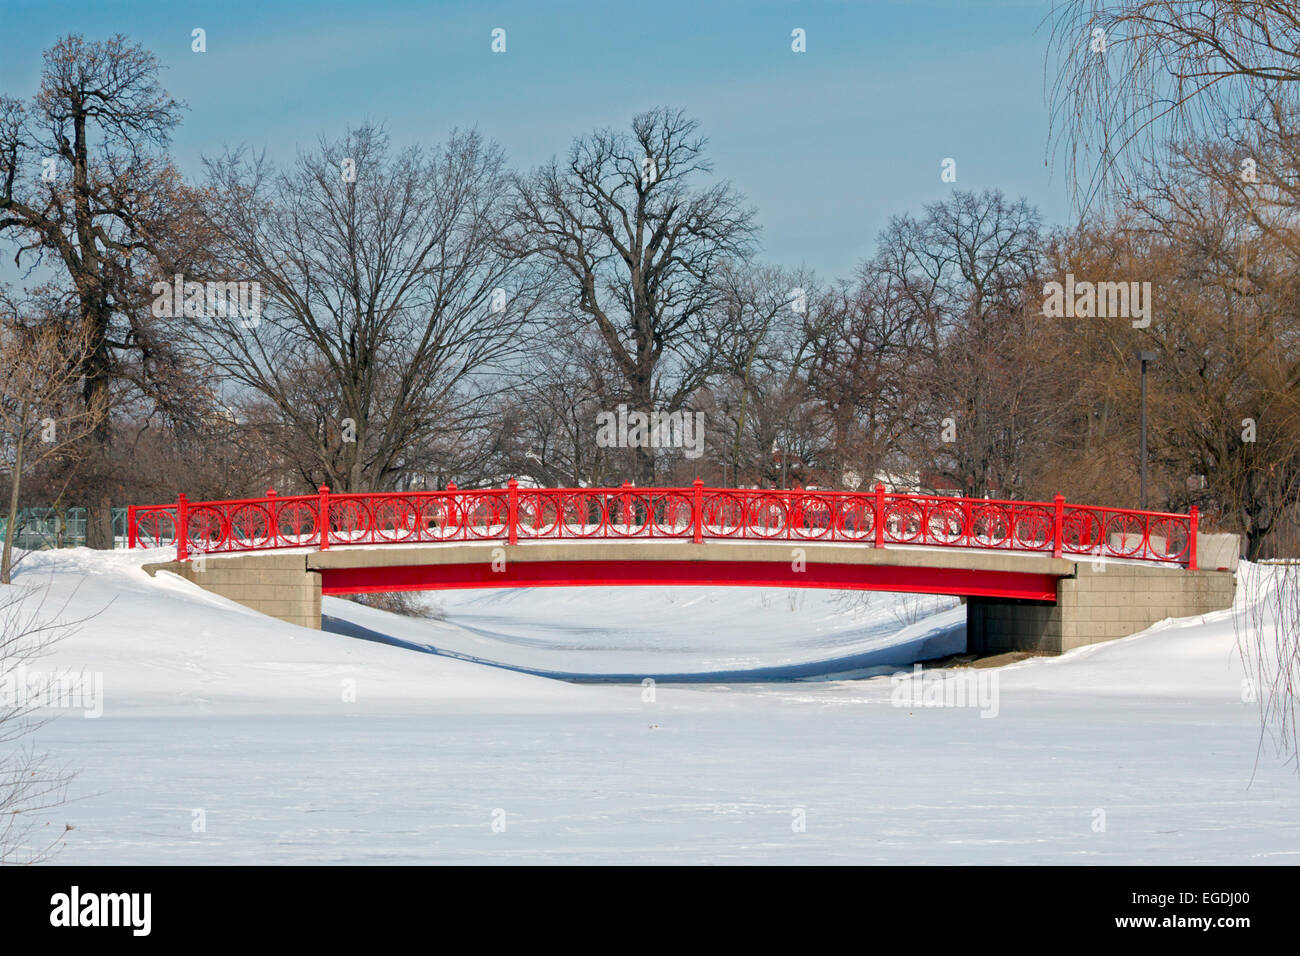 Detroit, Michigan - A bridge on Belle Isle, a state park on an island in the Detroit River. Stock Photo